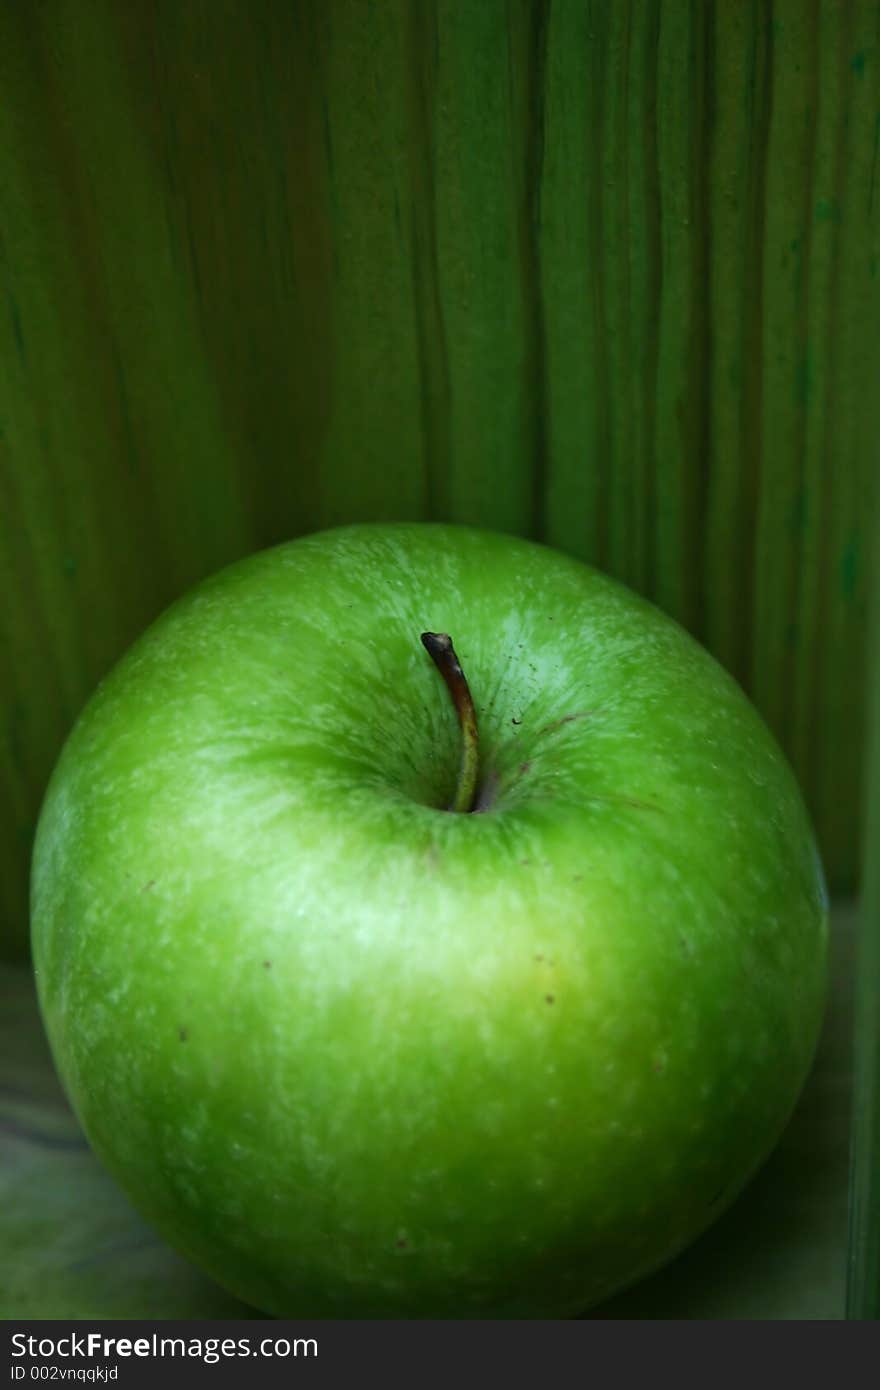 Green apple on a green background